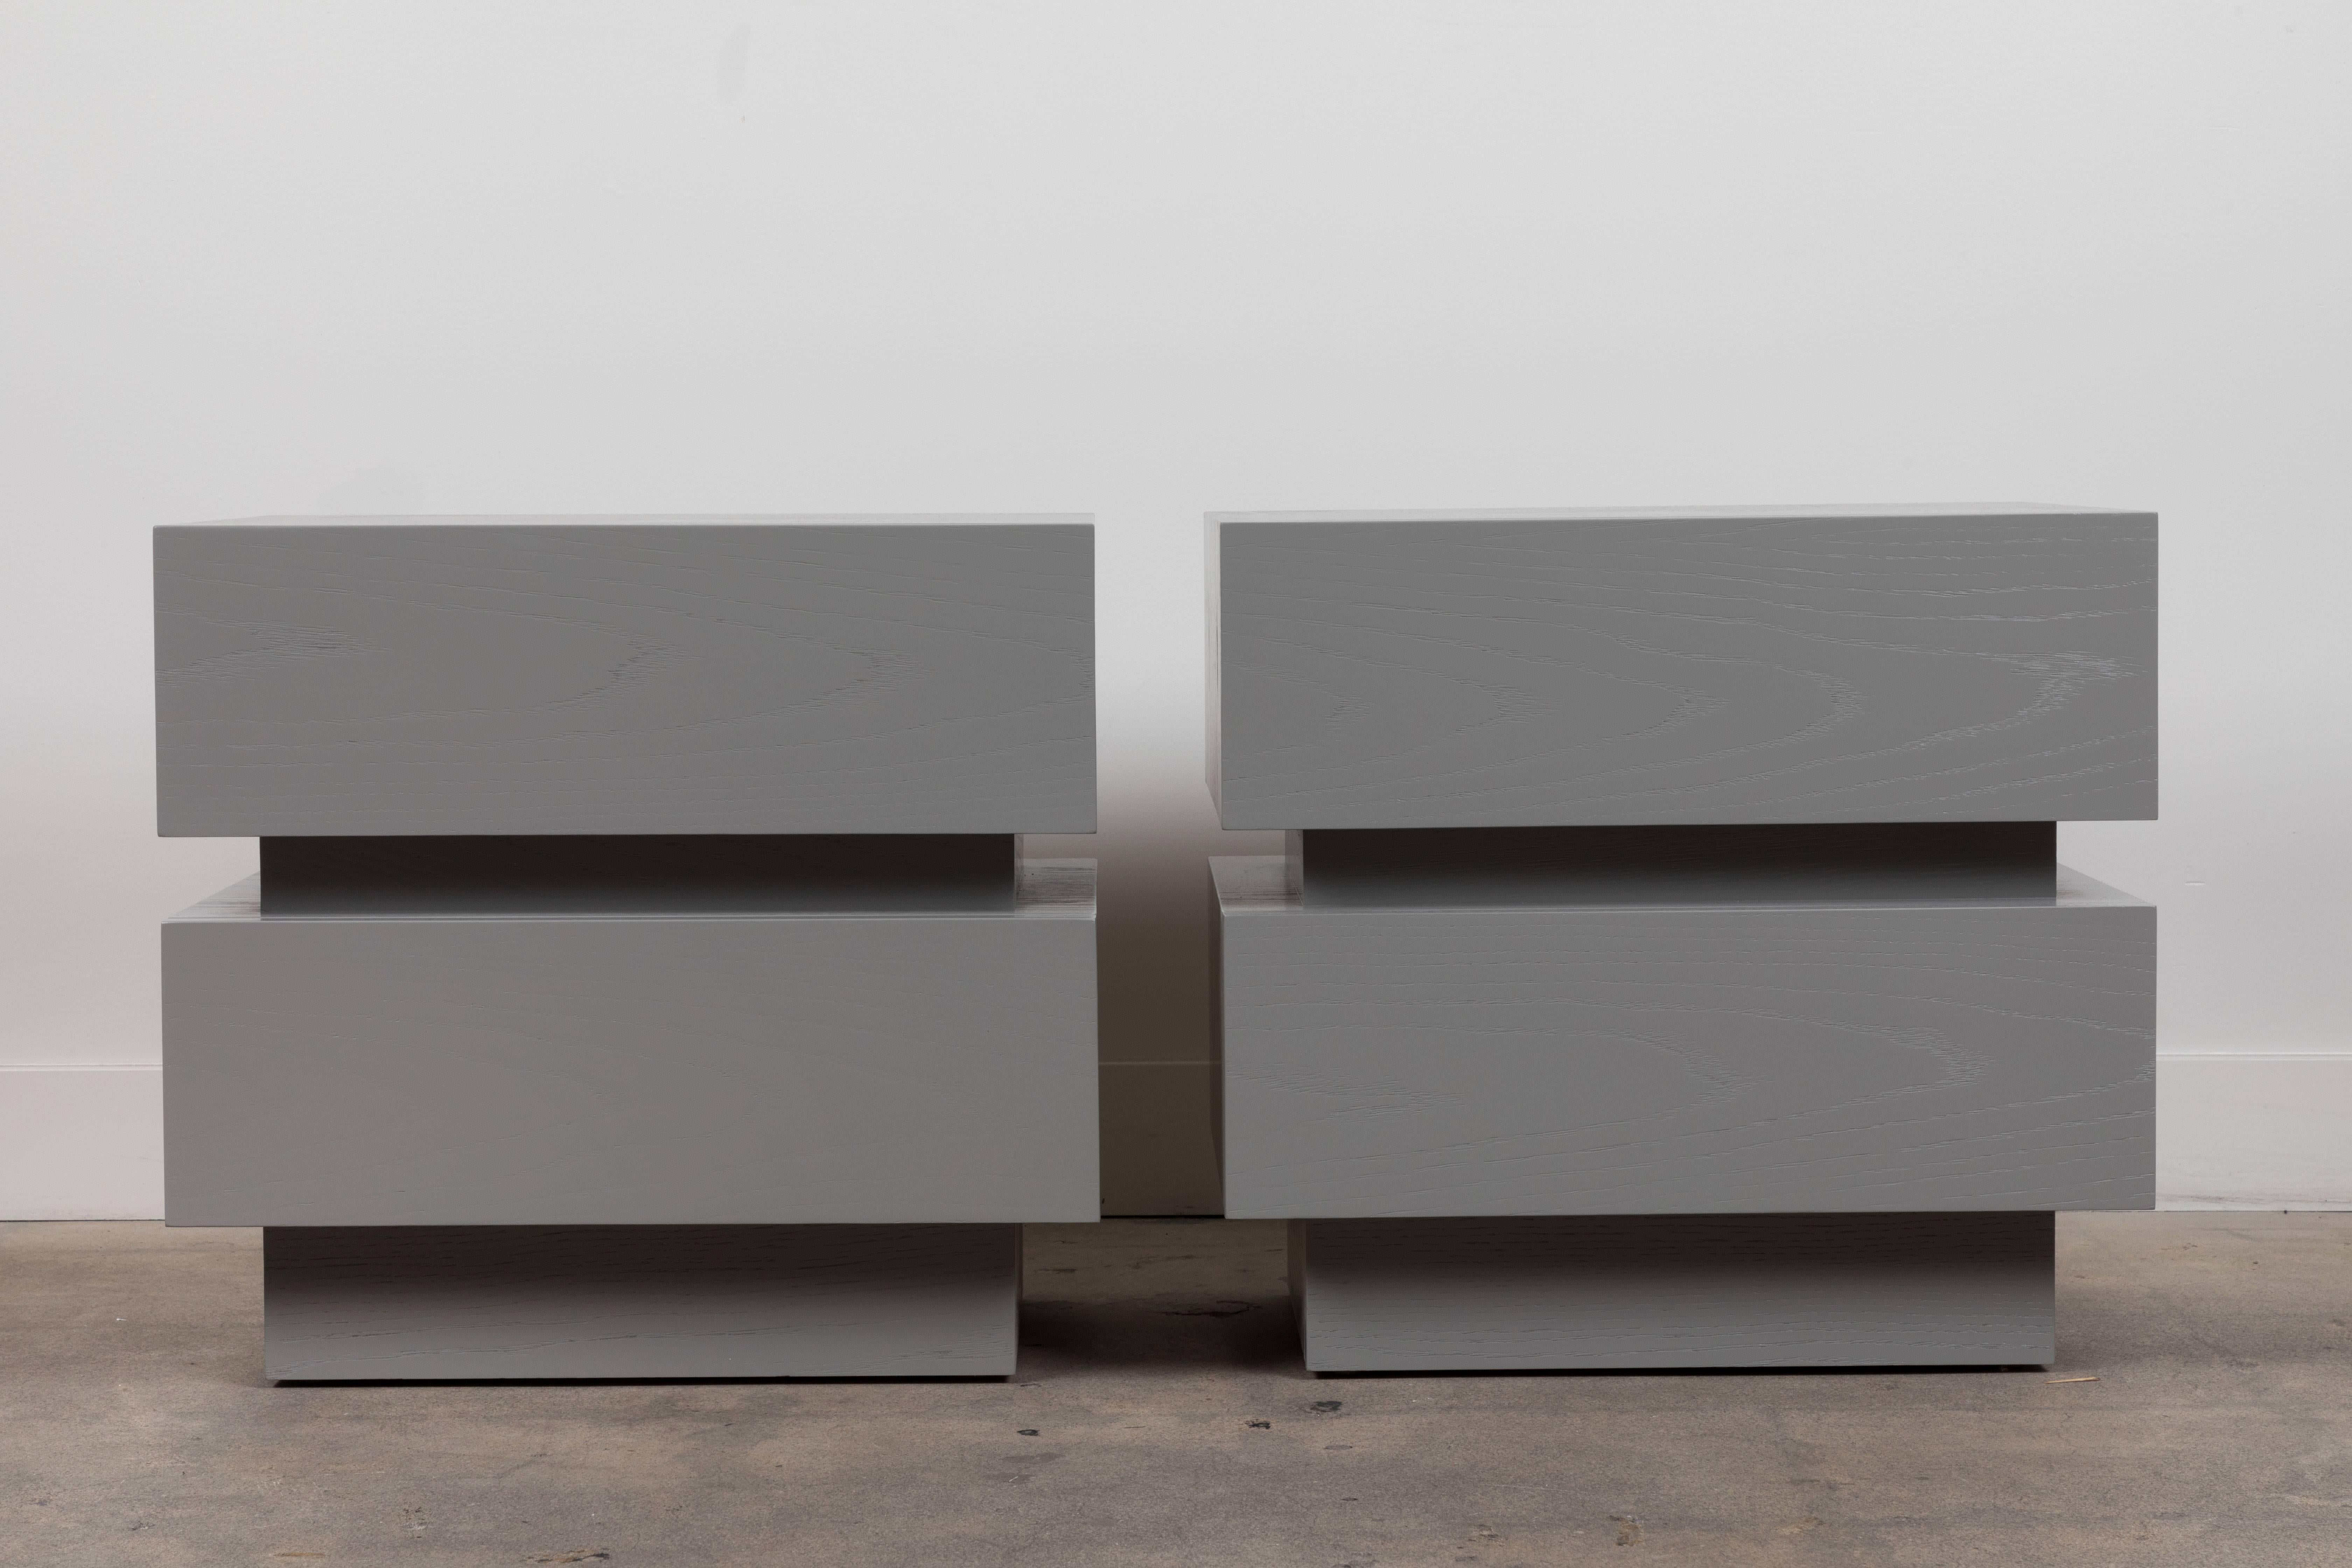 Pair of small stacked box nightstands by Lawson-Fenning

Available to order in various finishes with a 10-12 week lead time.